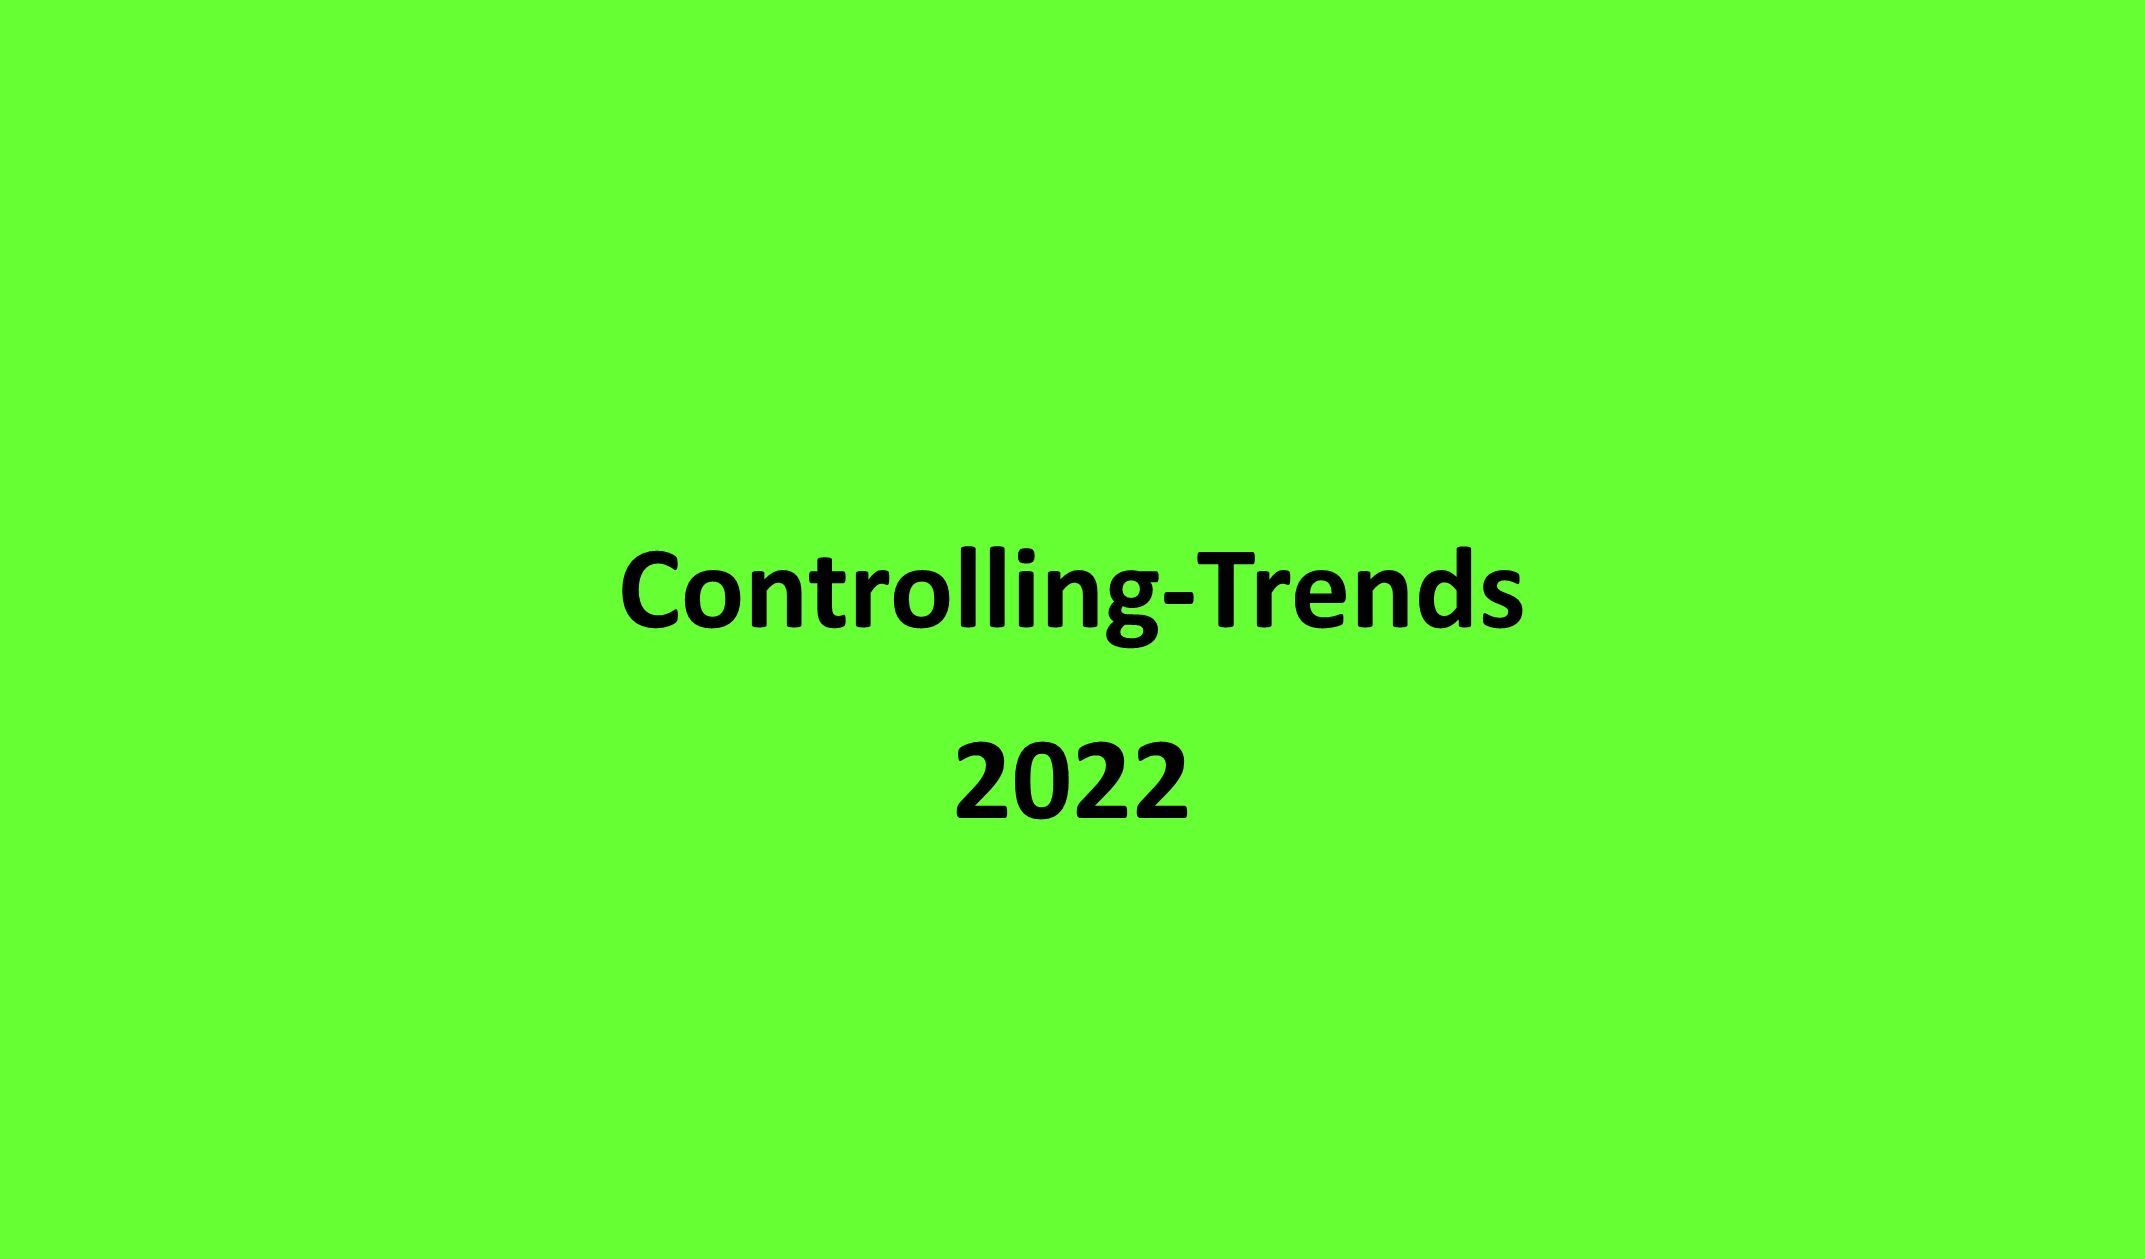 Controlling-Trends 2022